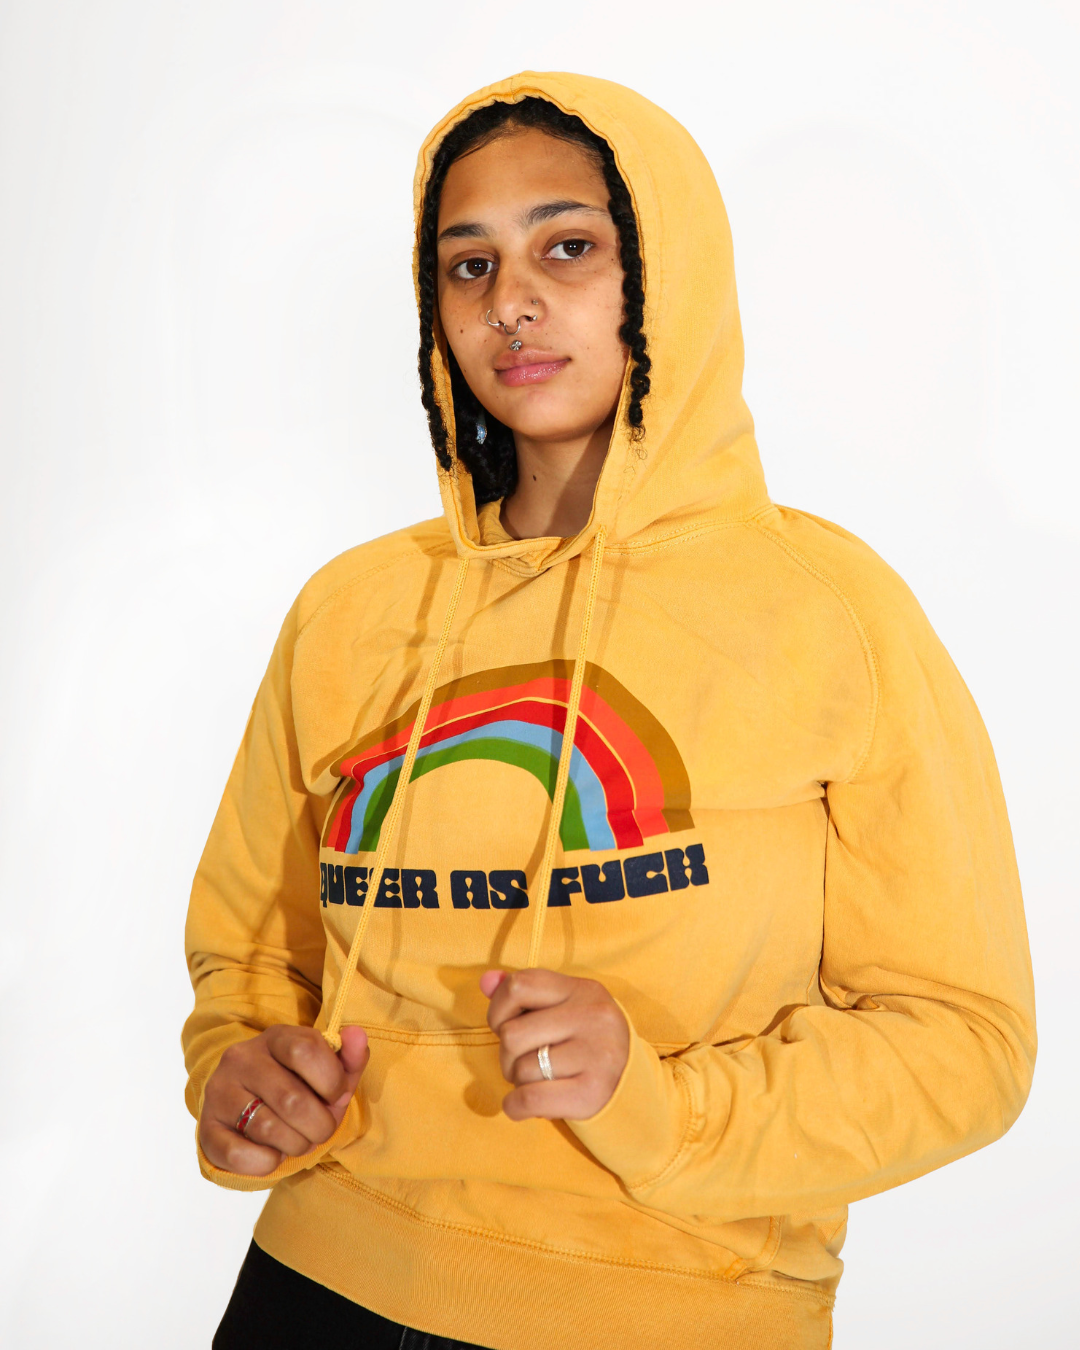 Model Grey is wearing the Queer As Fuck Vintage Hoodie in size S. They are 5'4" and their bra size is 32D. The hoodie is mustard yellow with a four-band rainbow of retro 70s colors. Across the bottom of the rainbow is the text "Queer As Fuck" in a groovy funk typeface.